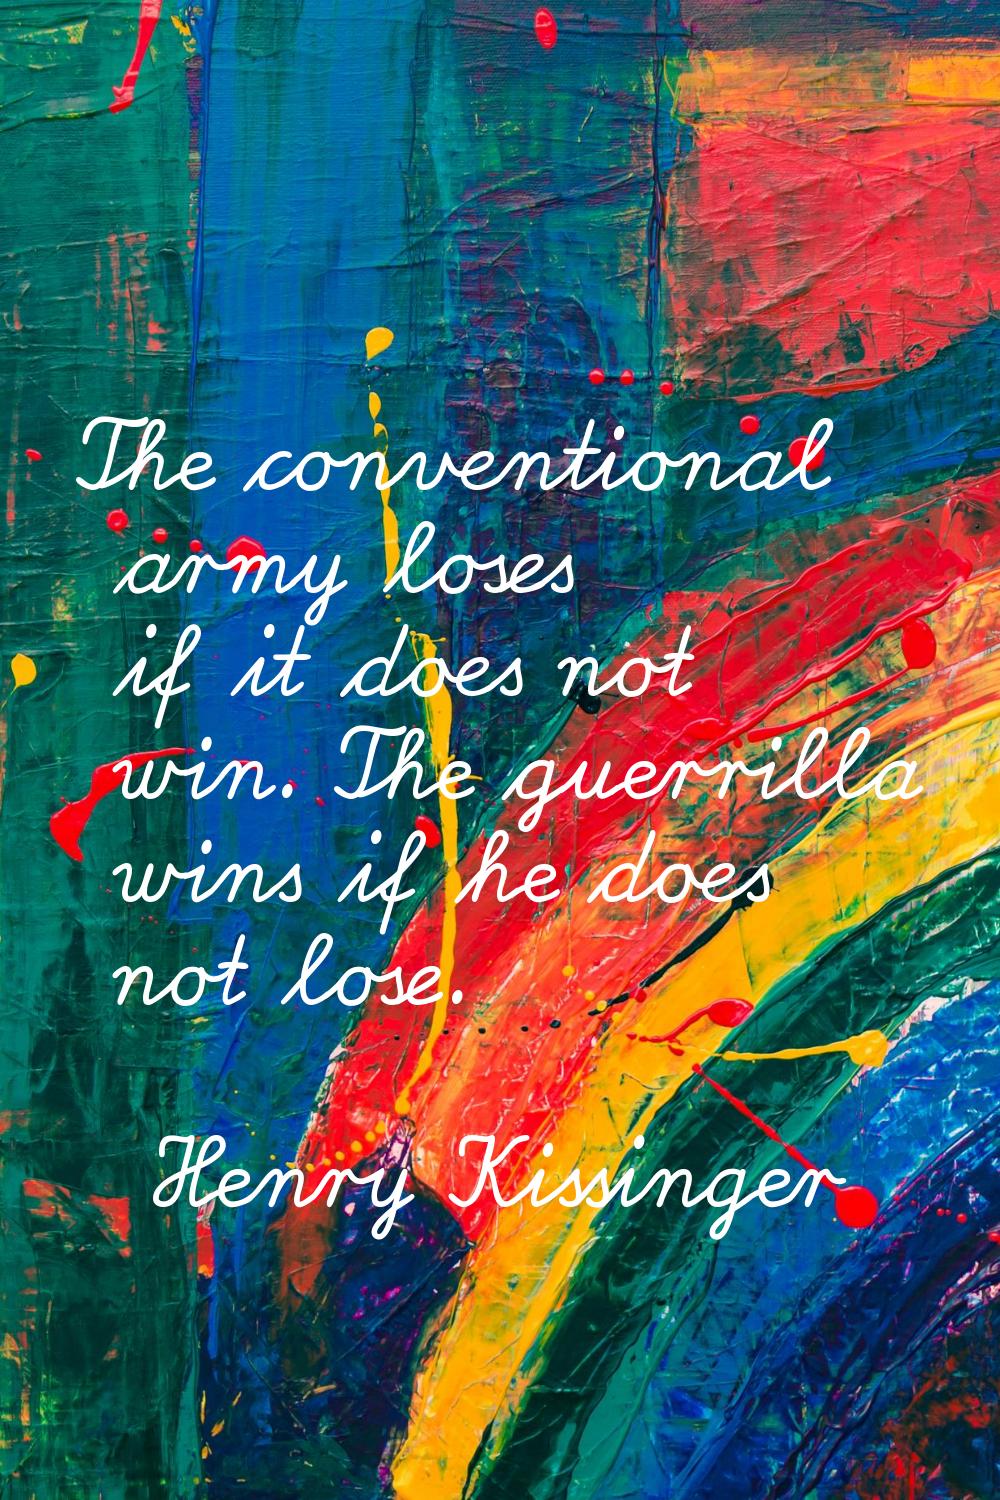 The conventional army loses if it does not win. The guerrilla wins if he does not lose.